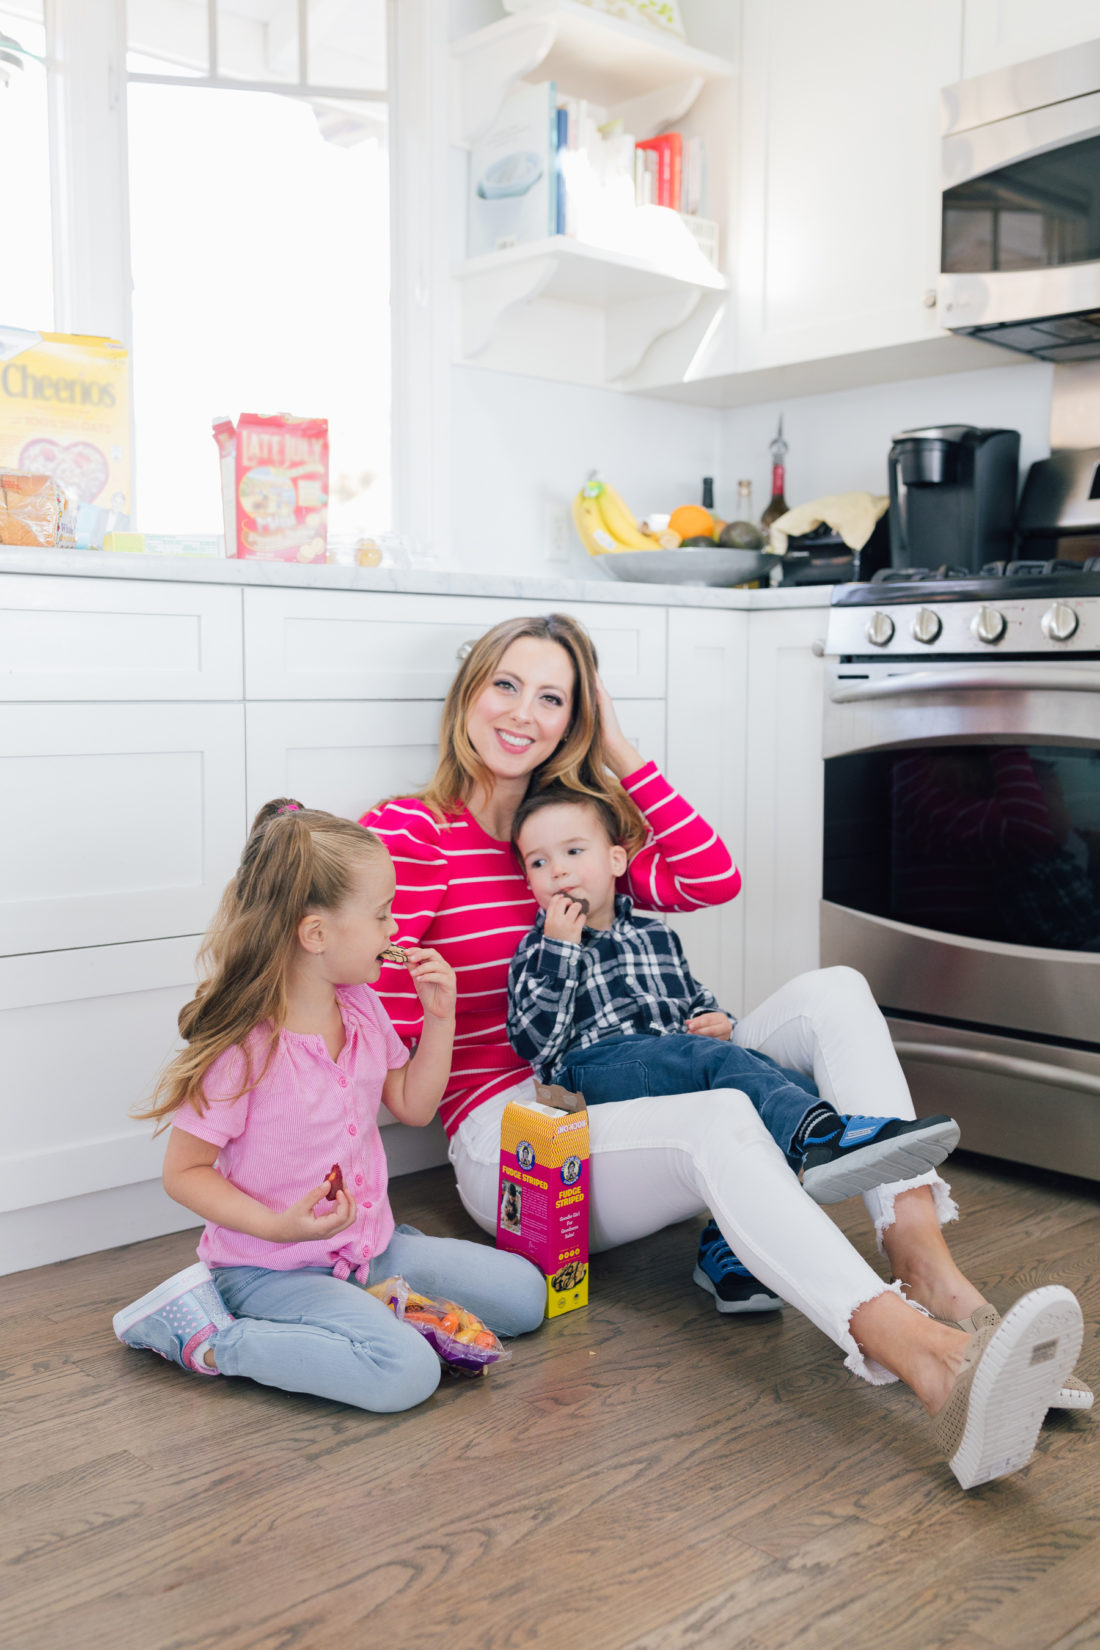 Eva Amurri Martino of Happily Eva After wears Skechers wears Sepulvada Blvd a la Mode Slip-On in the kitchen with her kids Marlowe and Major